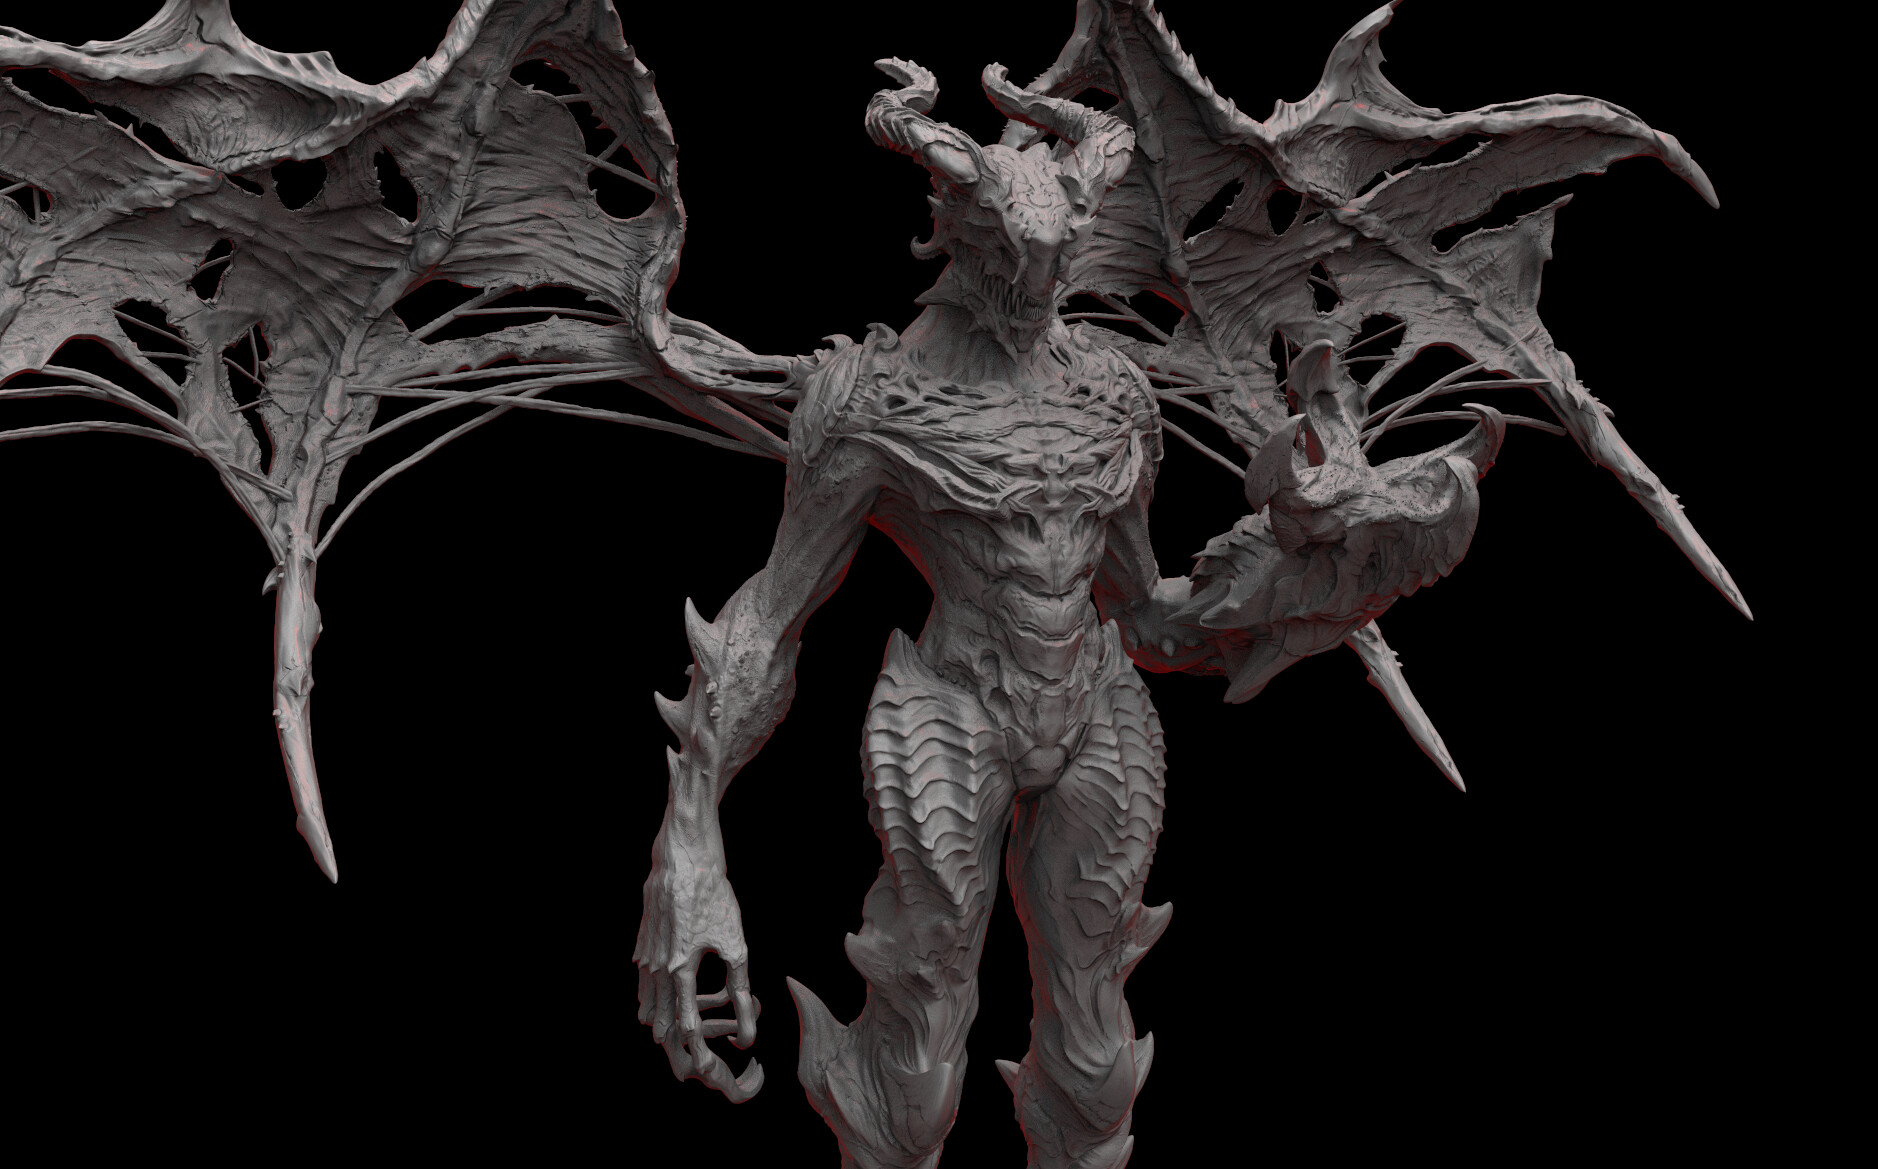 Rongbing Cao - Demon sculpting